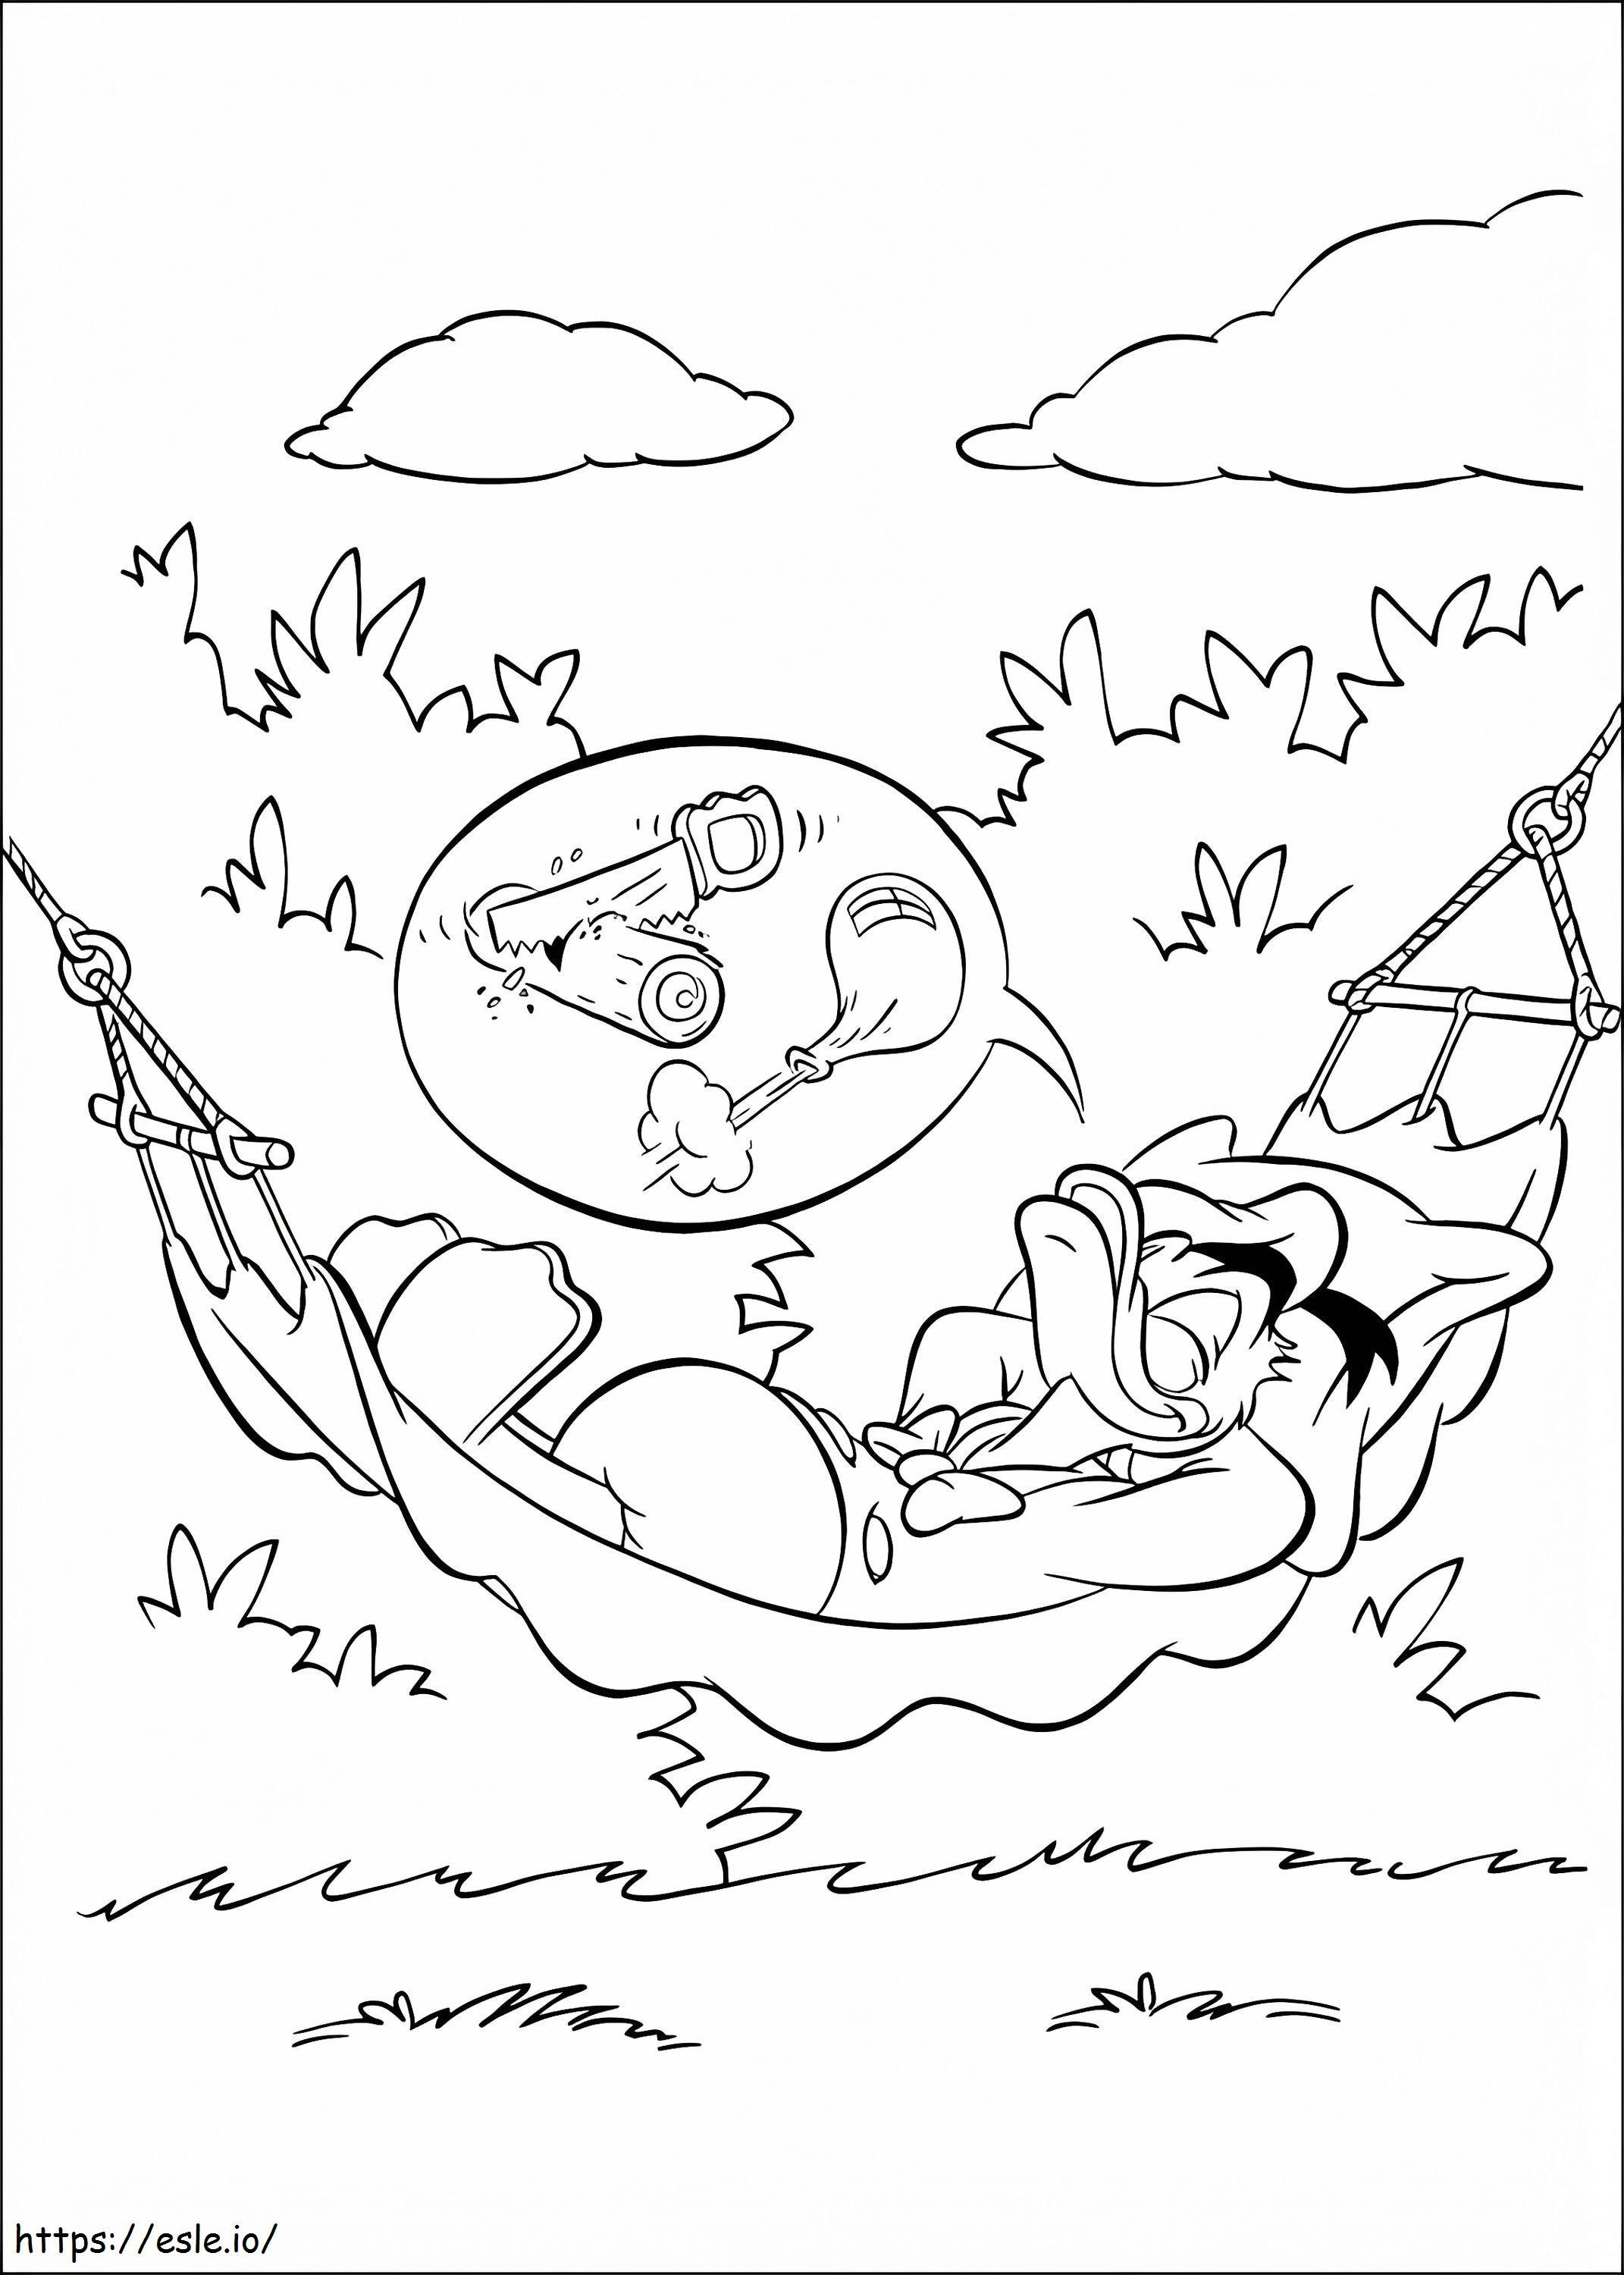 Donald Dreaming A4 coloring page